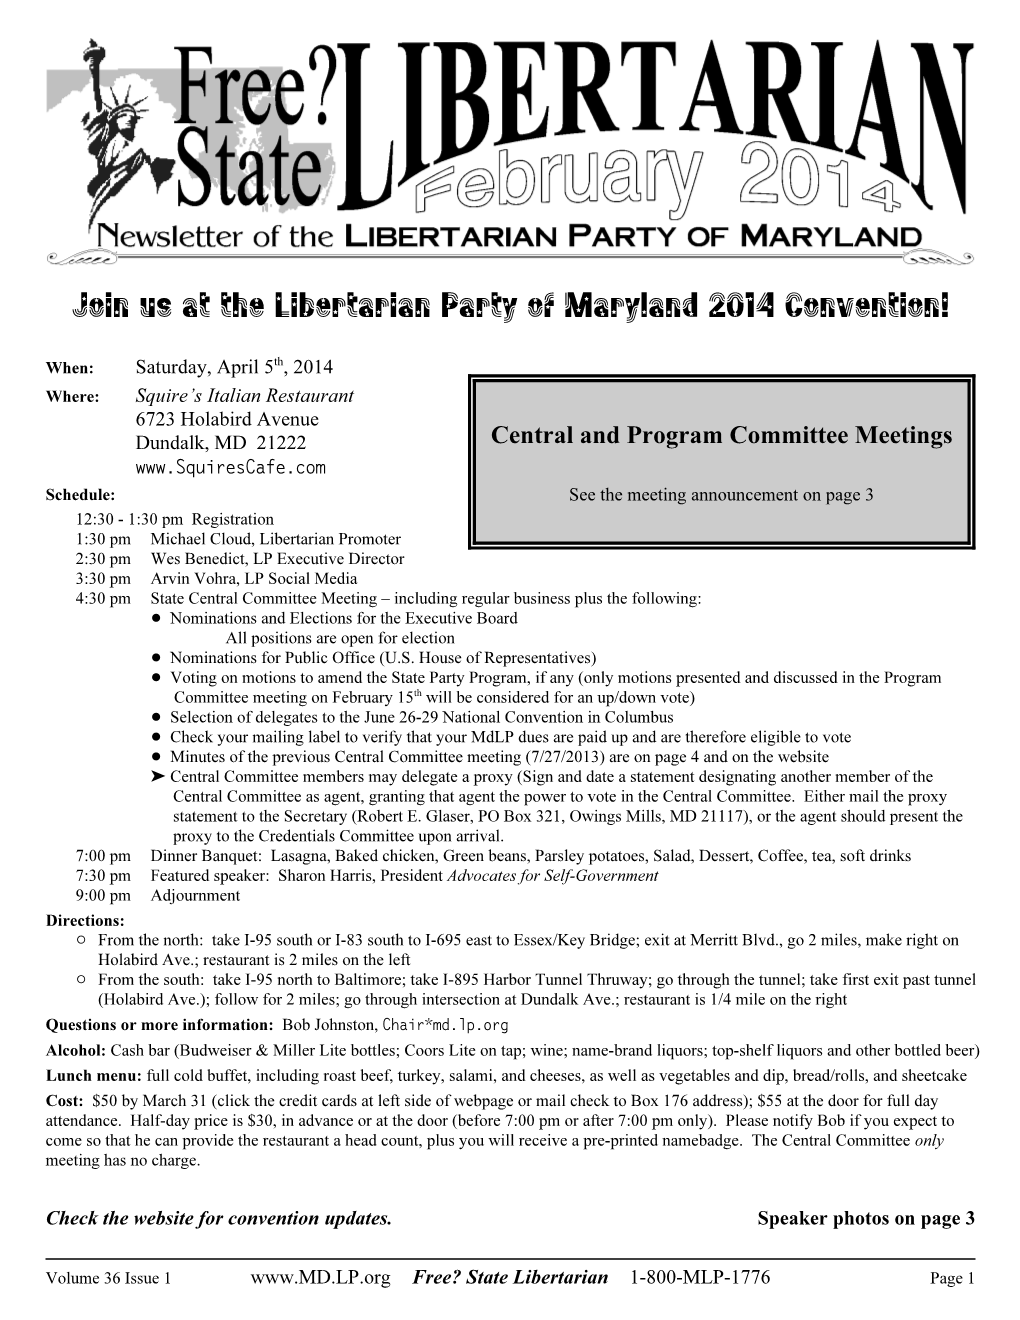 Join Us at the Libertarian Party of Maryland 2014 Convention!